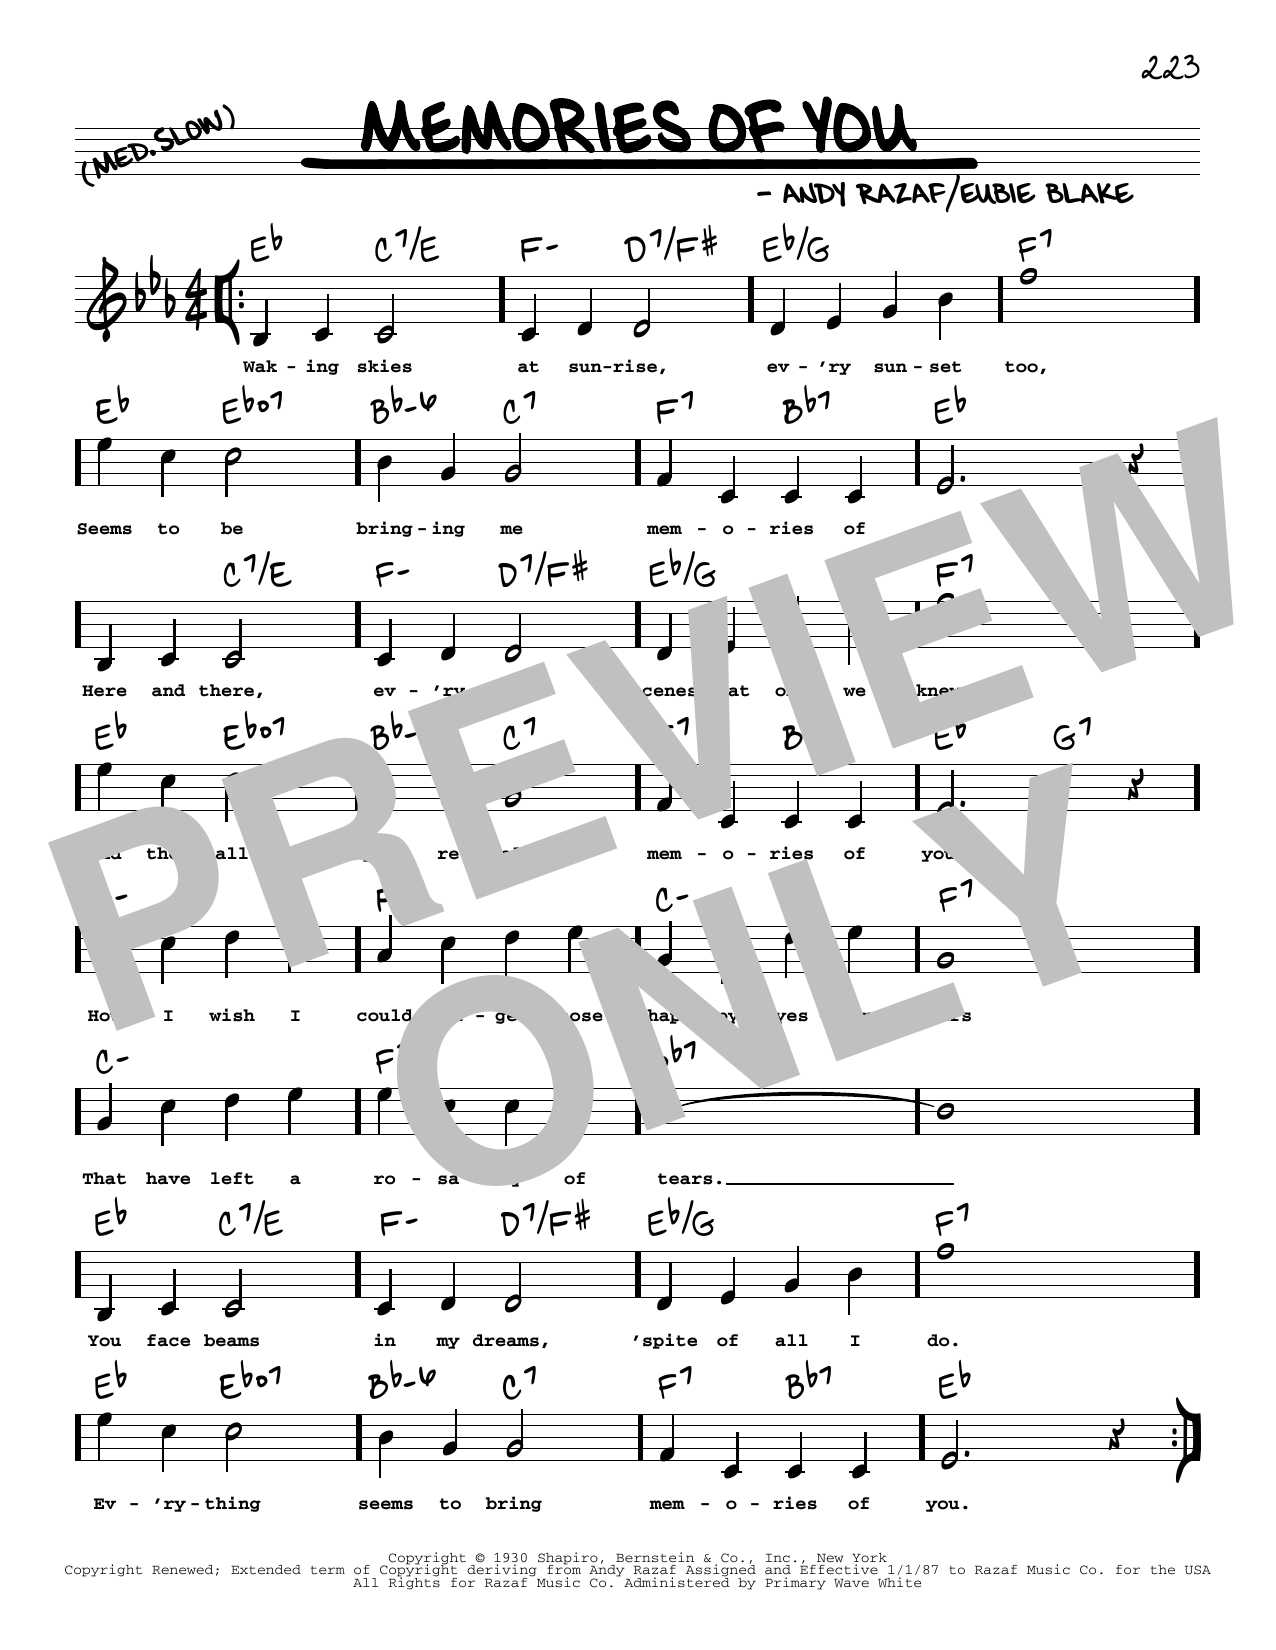 Andy Razaf Memories Of You (arr. Robert Rawlins) sheet music notes and chords. Download Printable PDF.